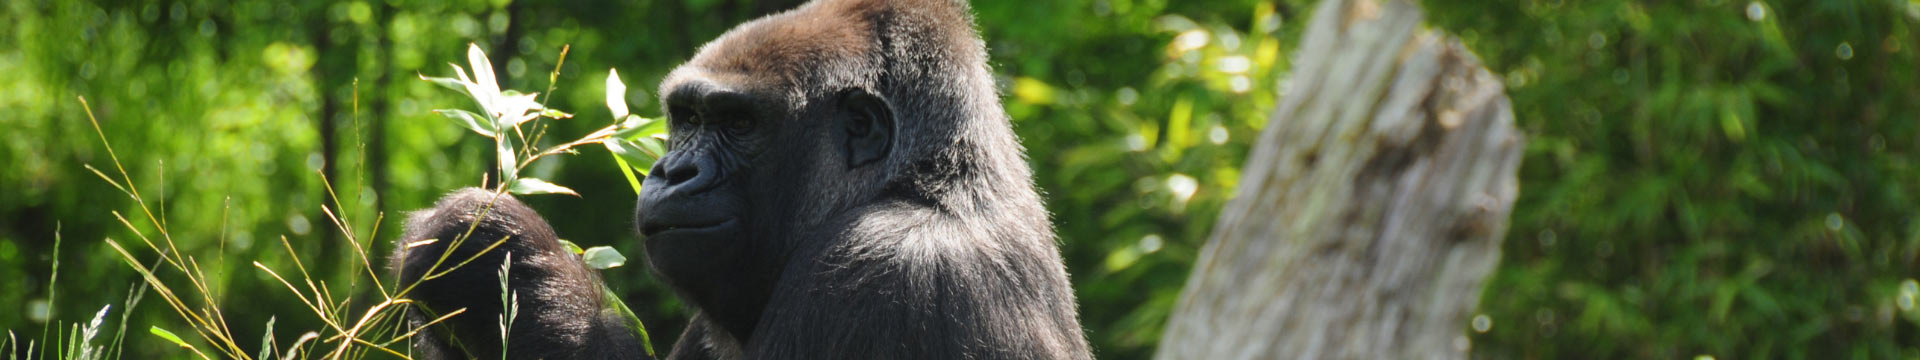 Commitment to Gorilla Conservation